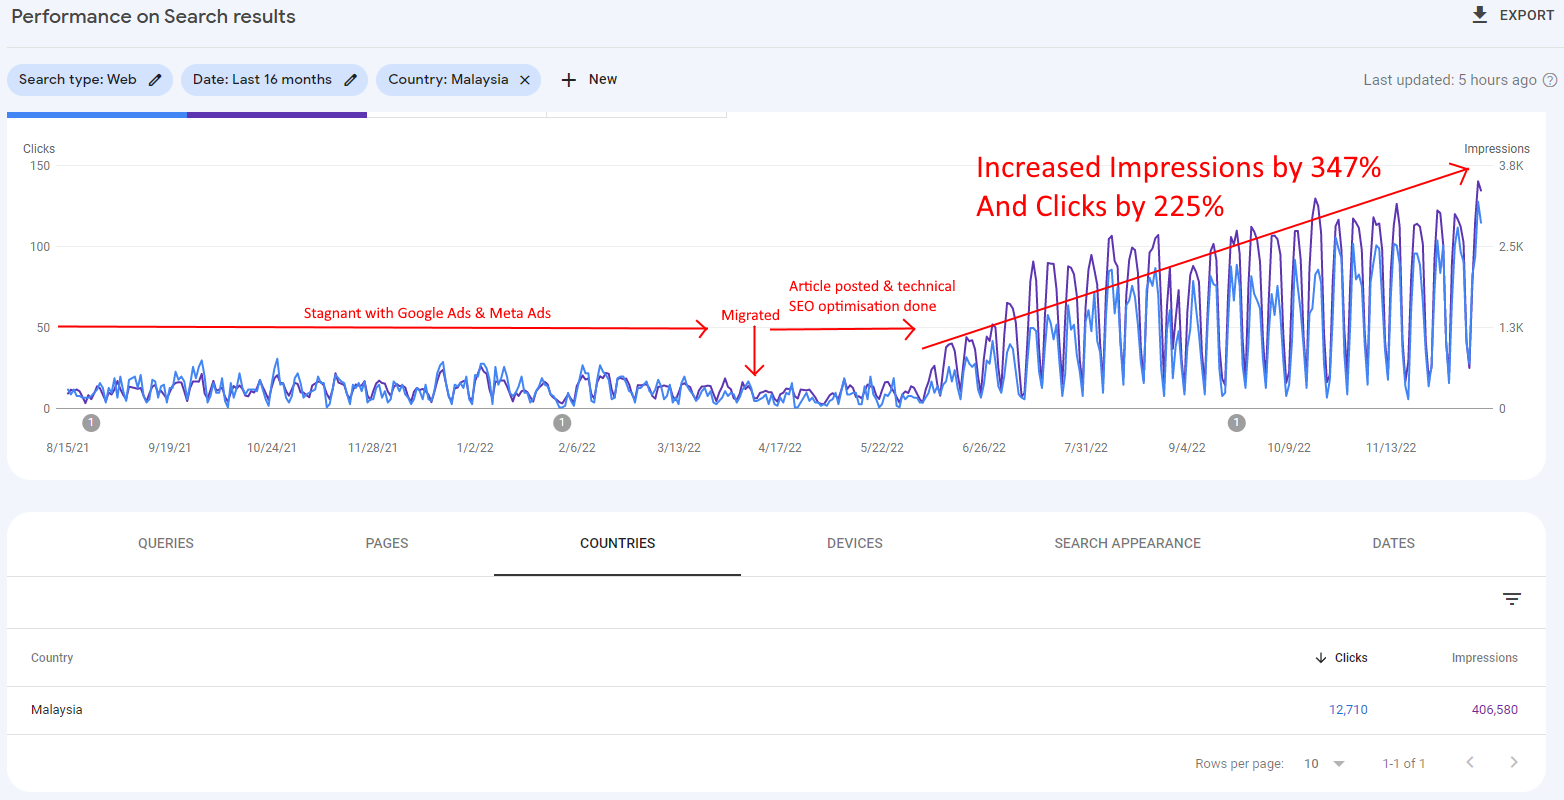 Last 16 months - Article posted & technical SEO optimisation done during April & May 2022